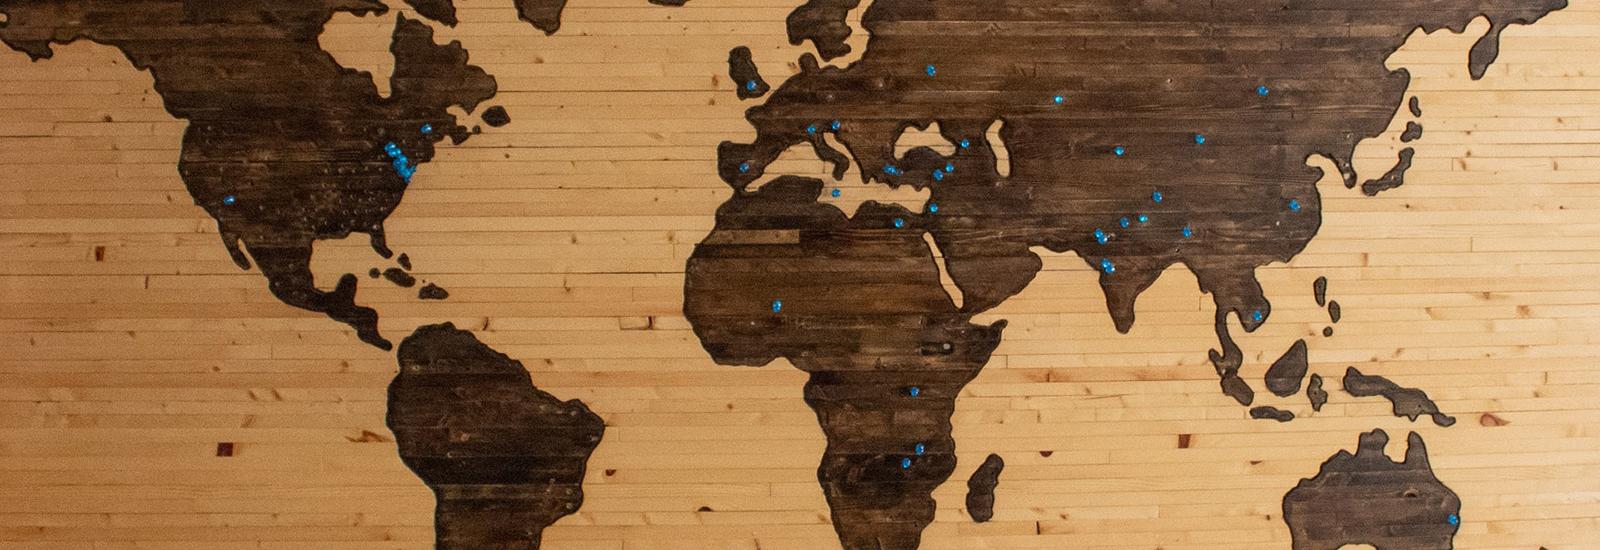 Map of the world screen-printed on wood